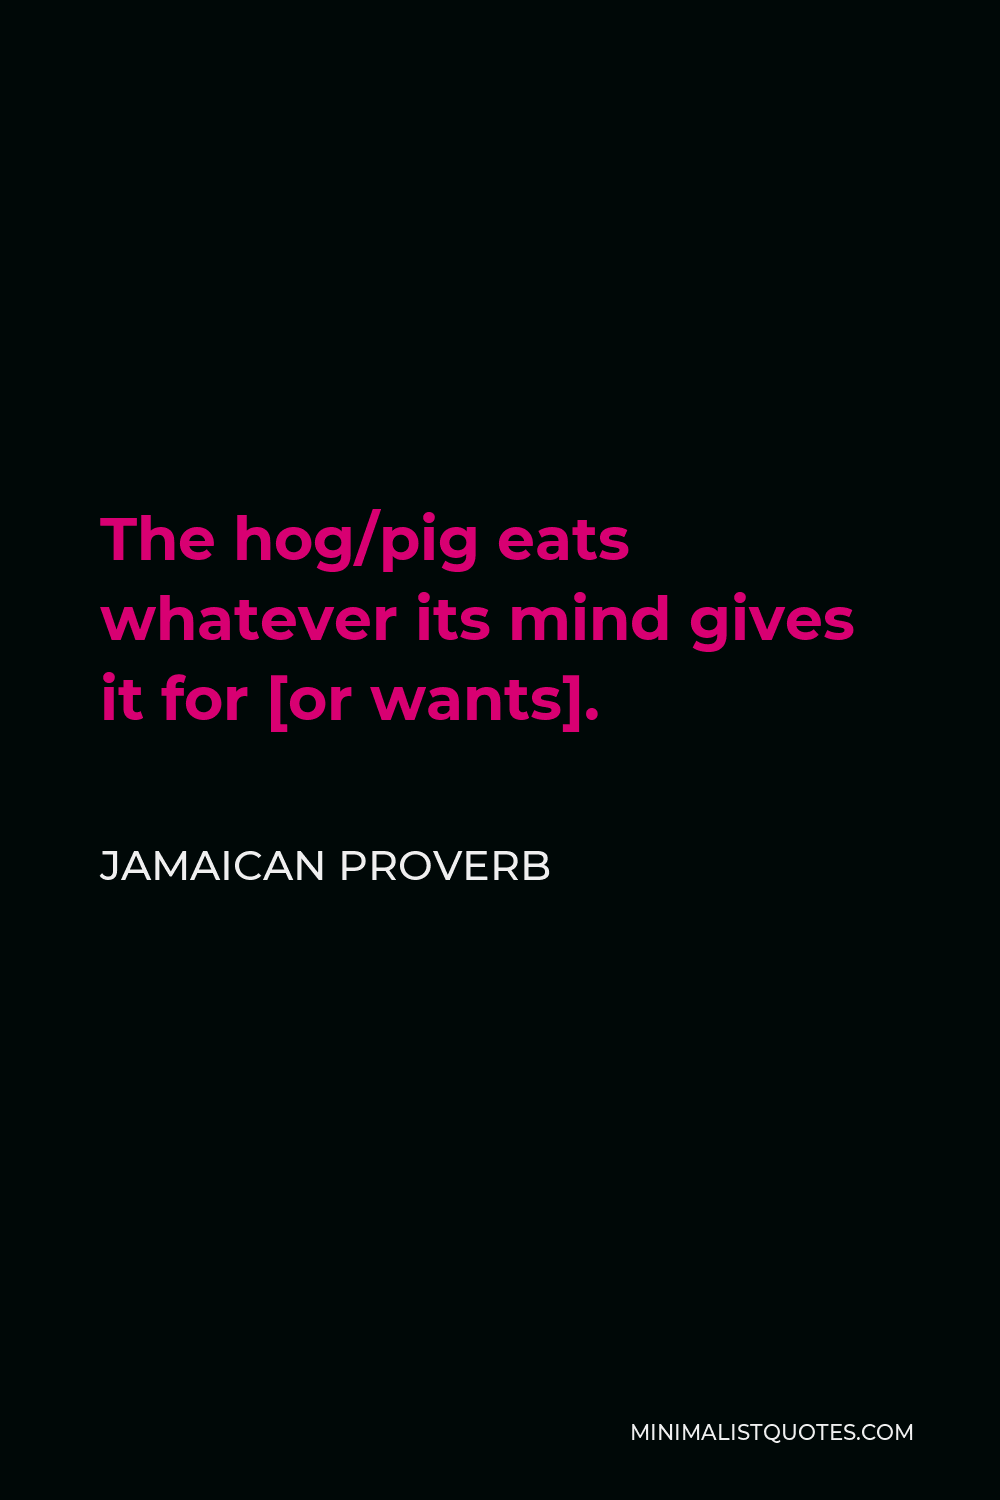 Jamaican Proverb Quote - The hog/pig eats whatever its mind gives it for [or wants].